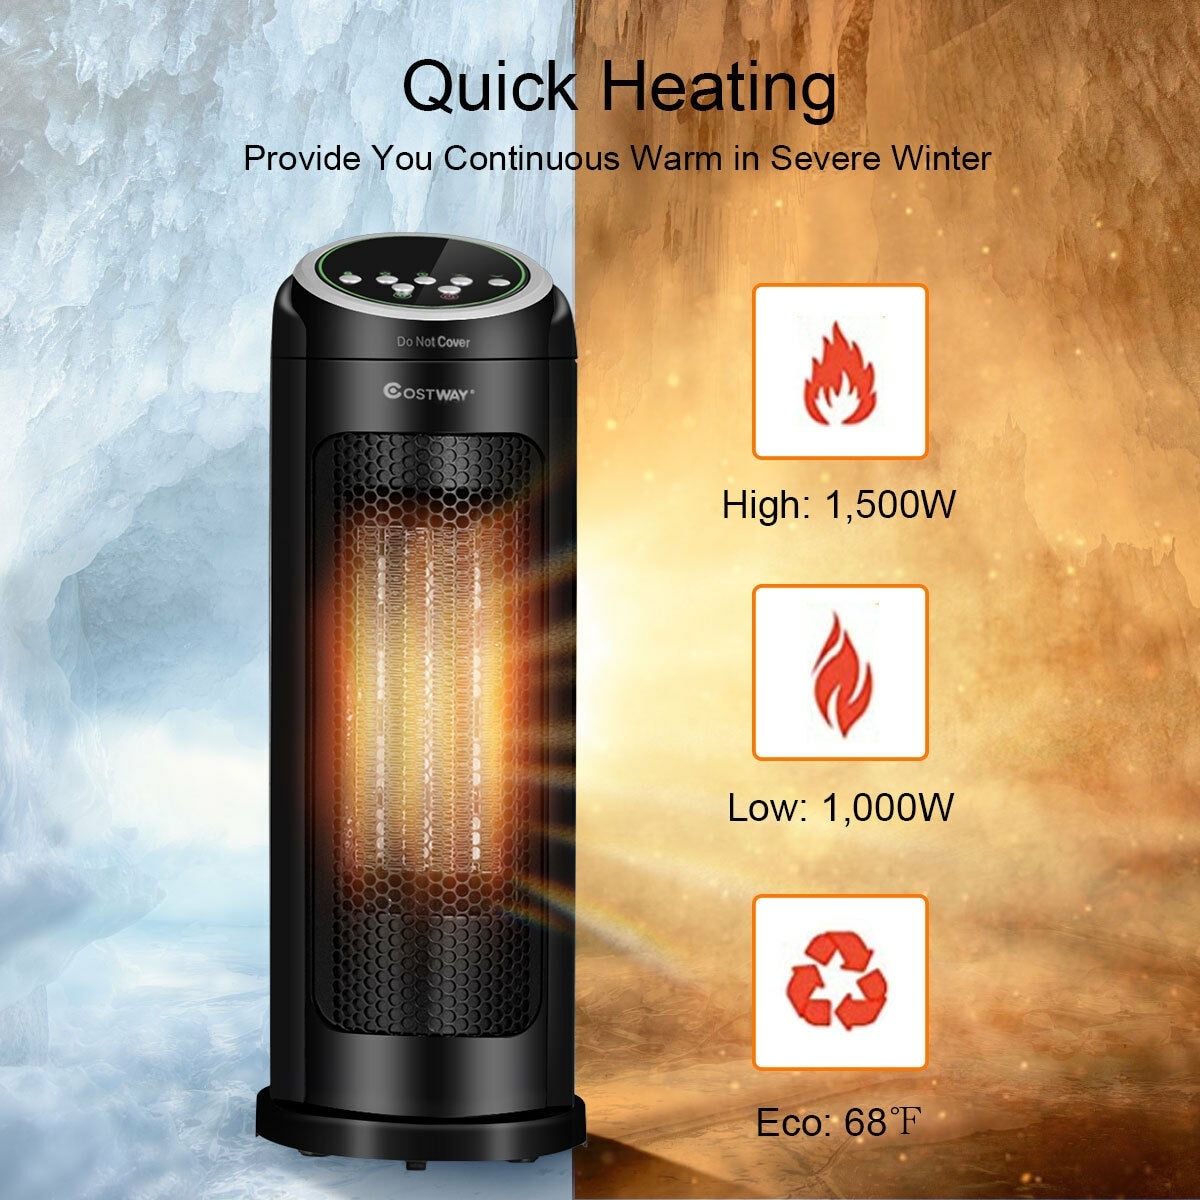 https://ak1.ostkcdn.com/images/products/is/images/direct/4cbbd9485be371868f9c2d5185ea22bfe104efc0/Costway-Portable-Oscillating-PTC-Ceramic-Space-Heater-1500W-LED-12H-Timer-Remote-Control.jpg